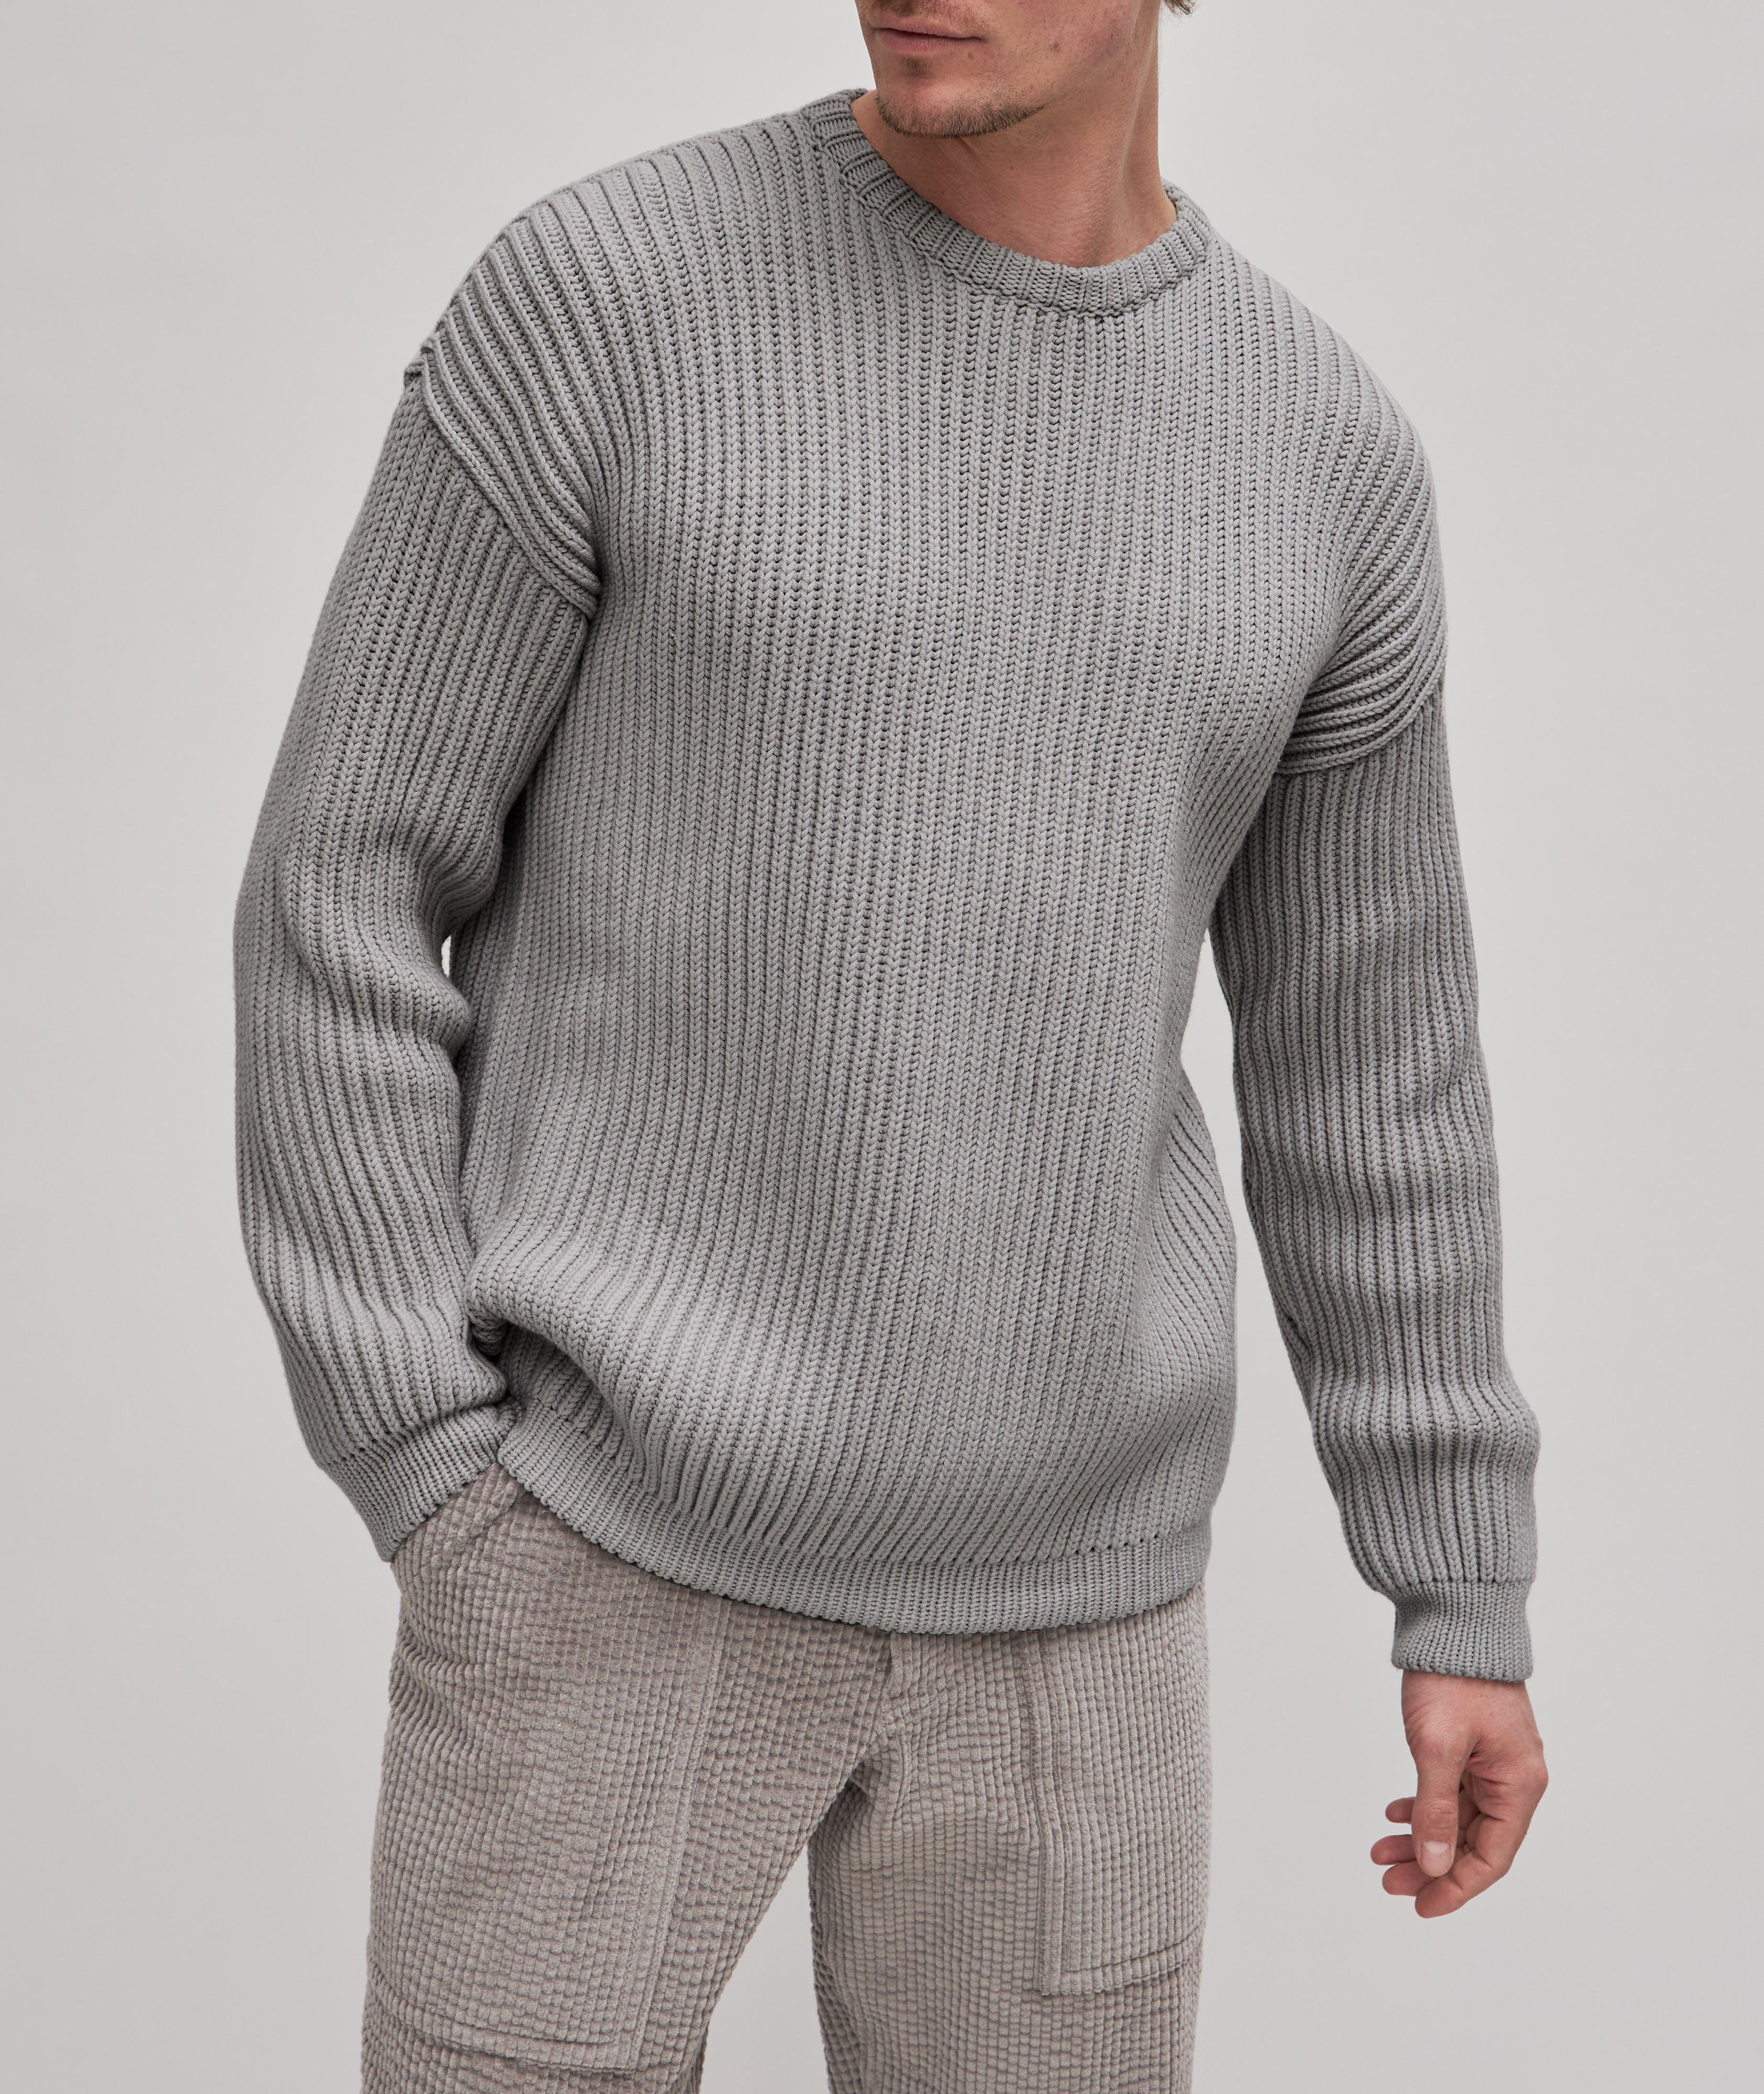 Virgin Wool Thick Rib-Knitted Crewneck Sweater image 2